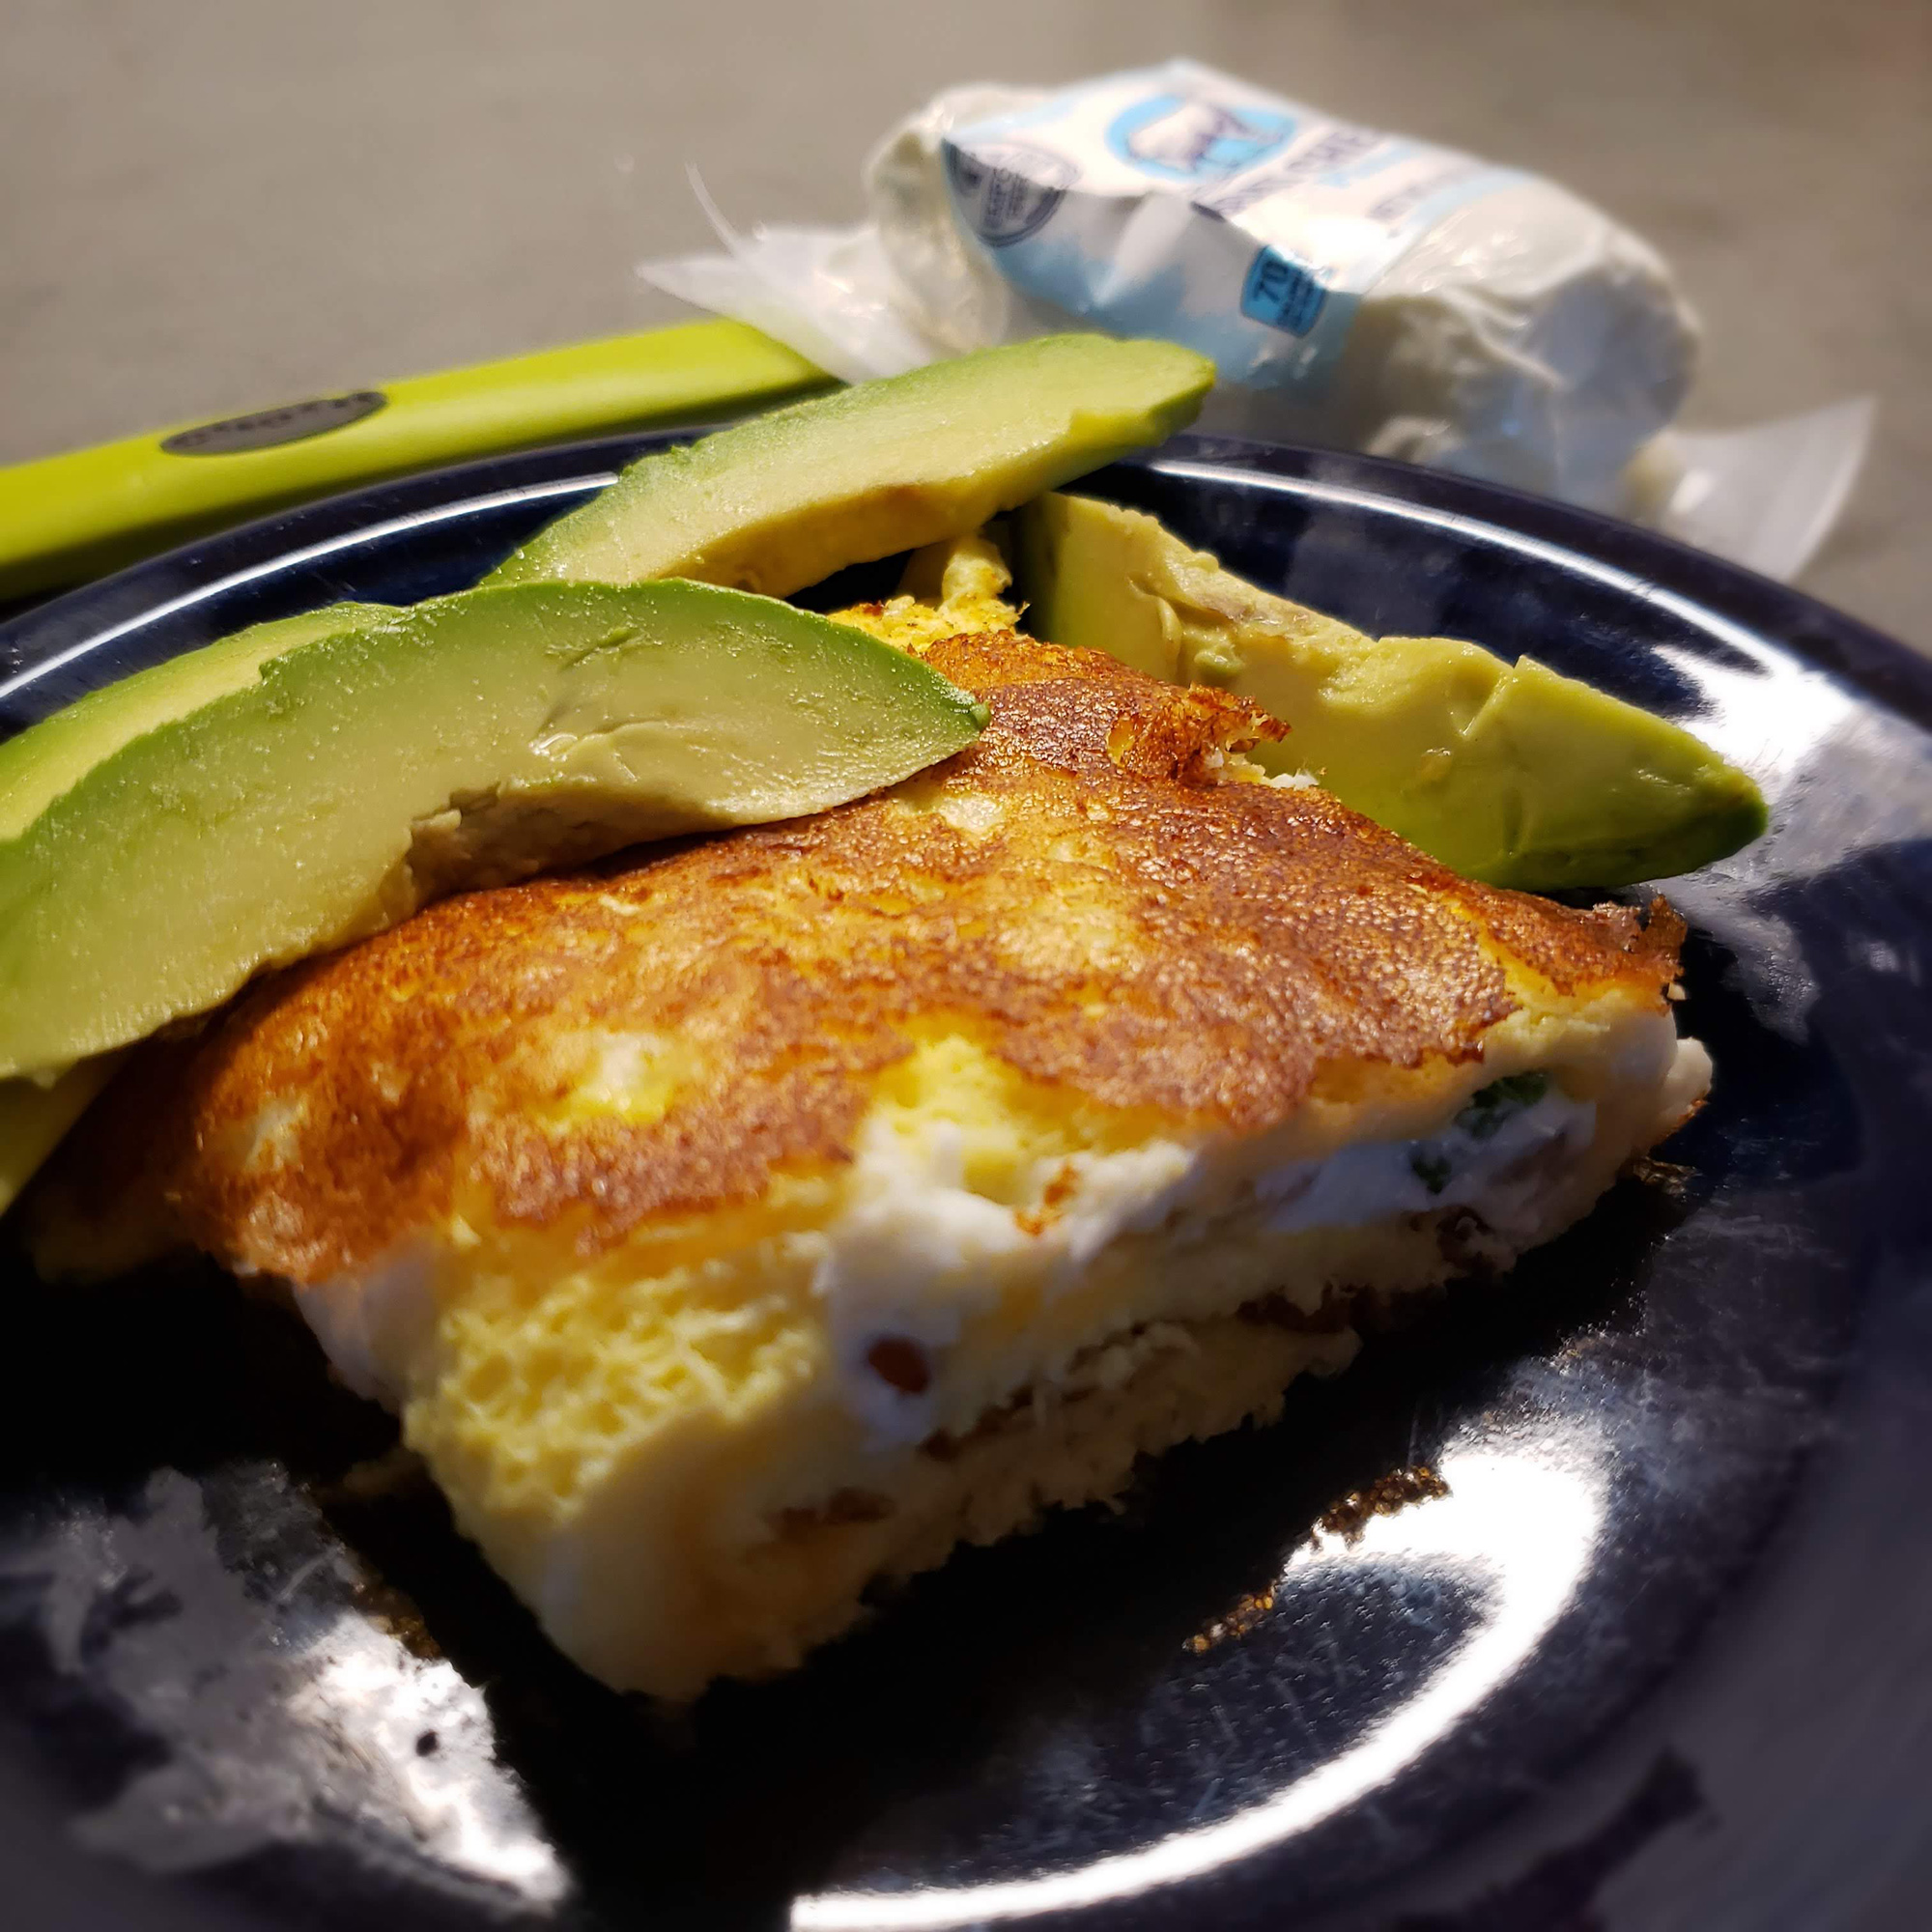 Plated omelette with avocado slices